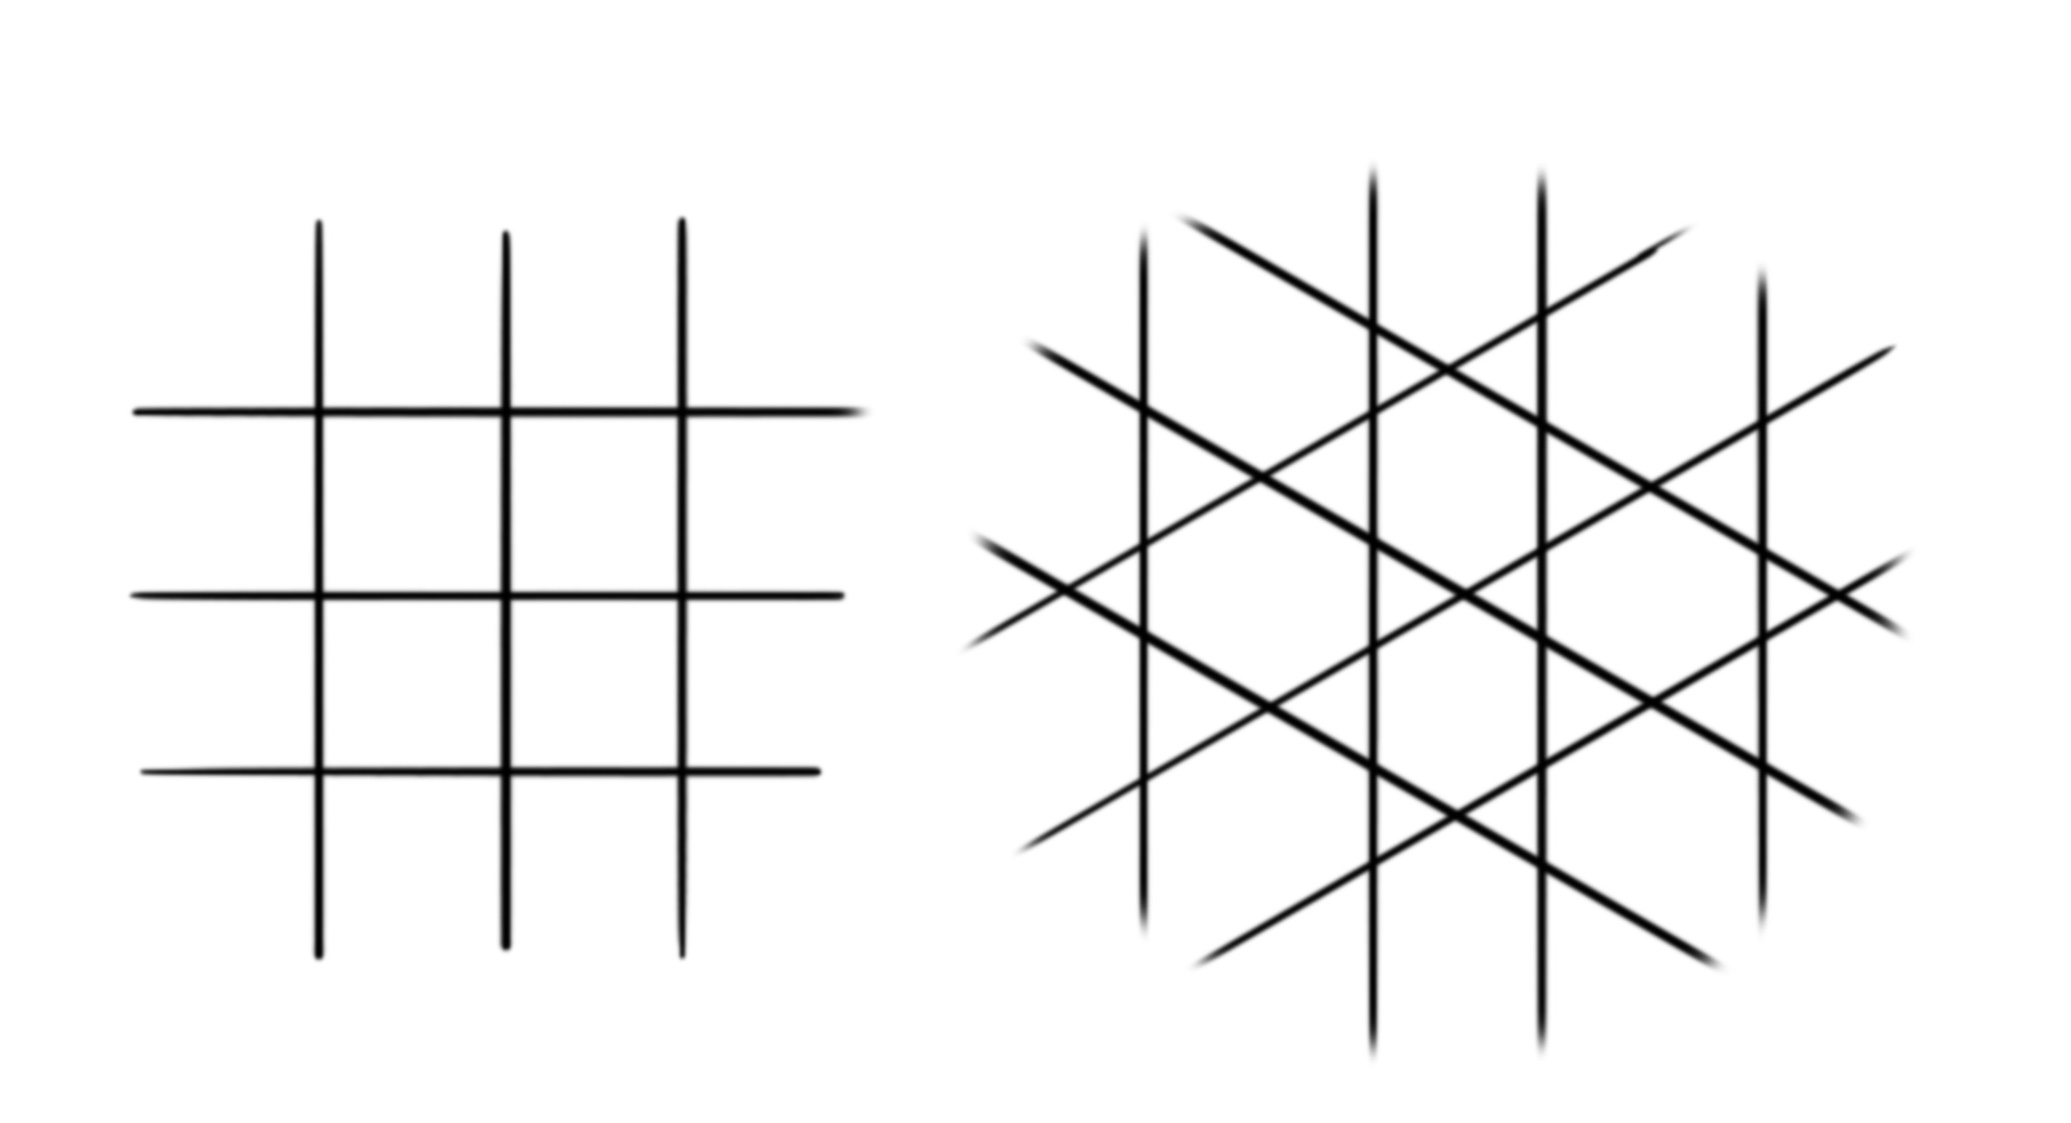 two models for weaving. On the left a square grid, on the right a set of 3 parralel lines which form hexagons and triangles.